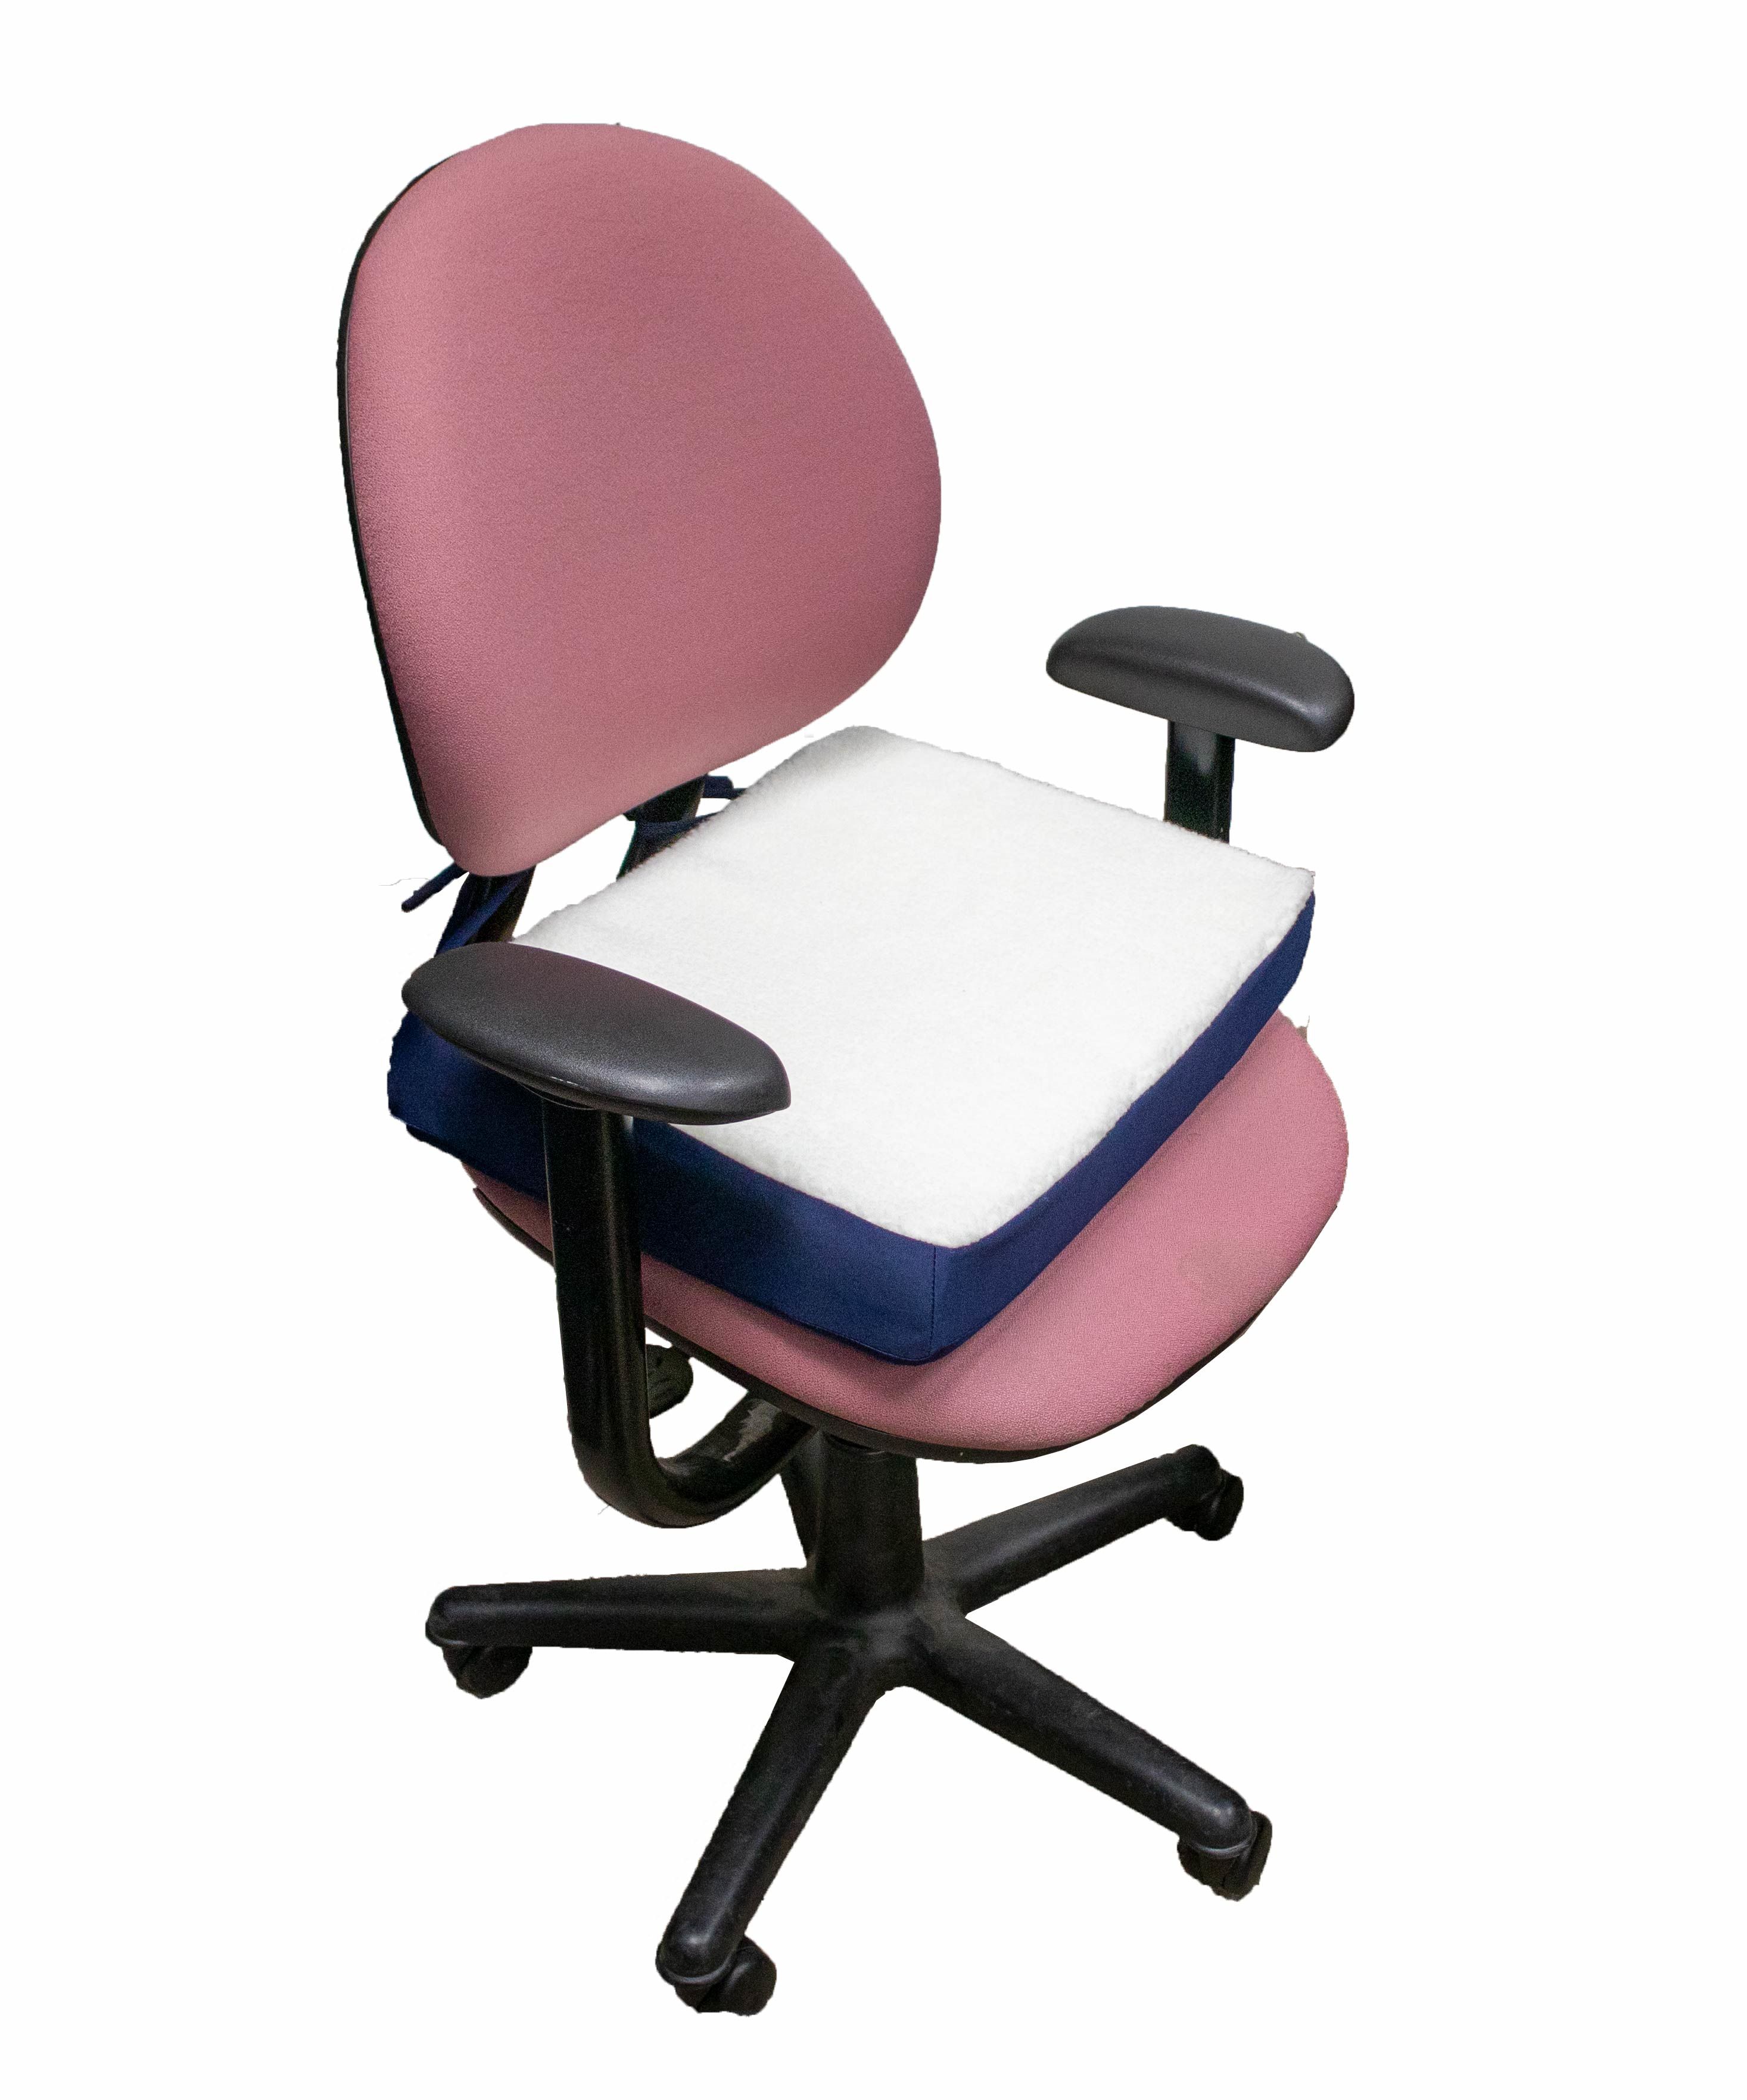 Memory Foam seat cushion for office chair desk with Plush Casing